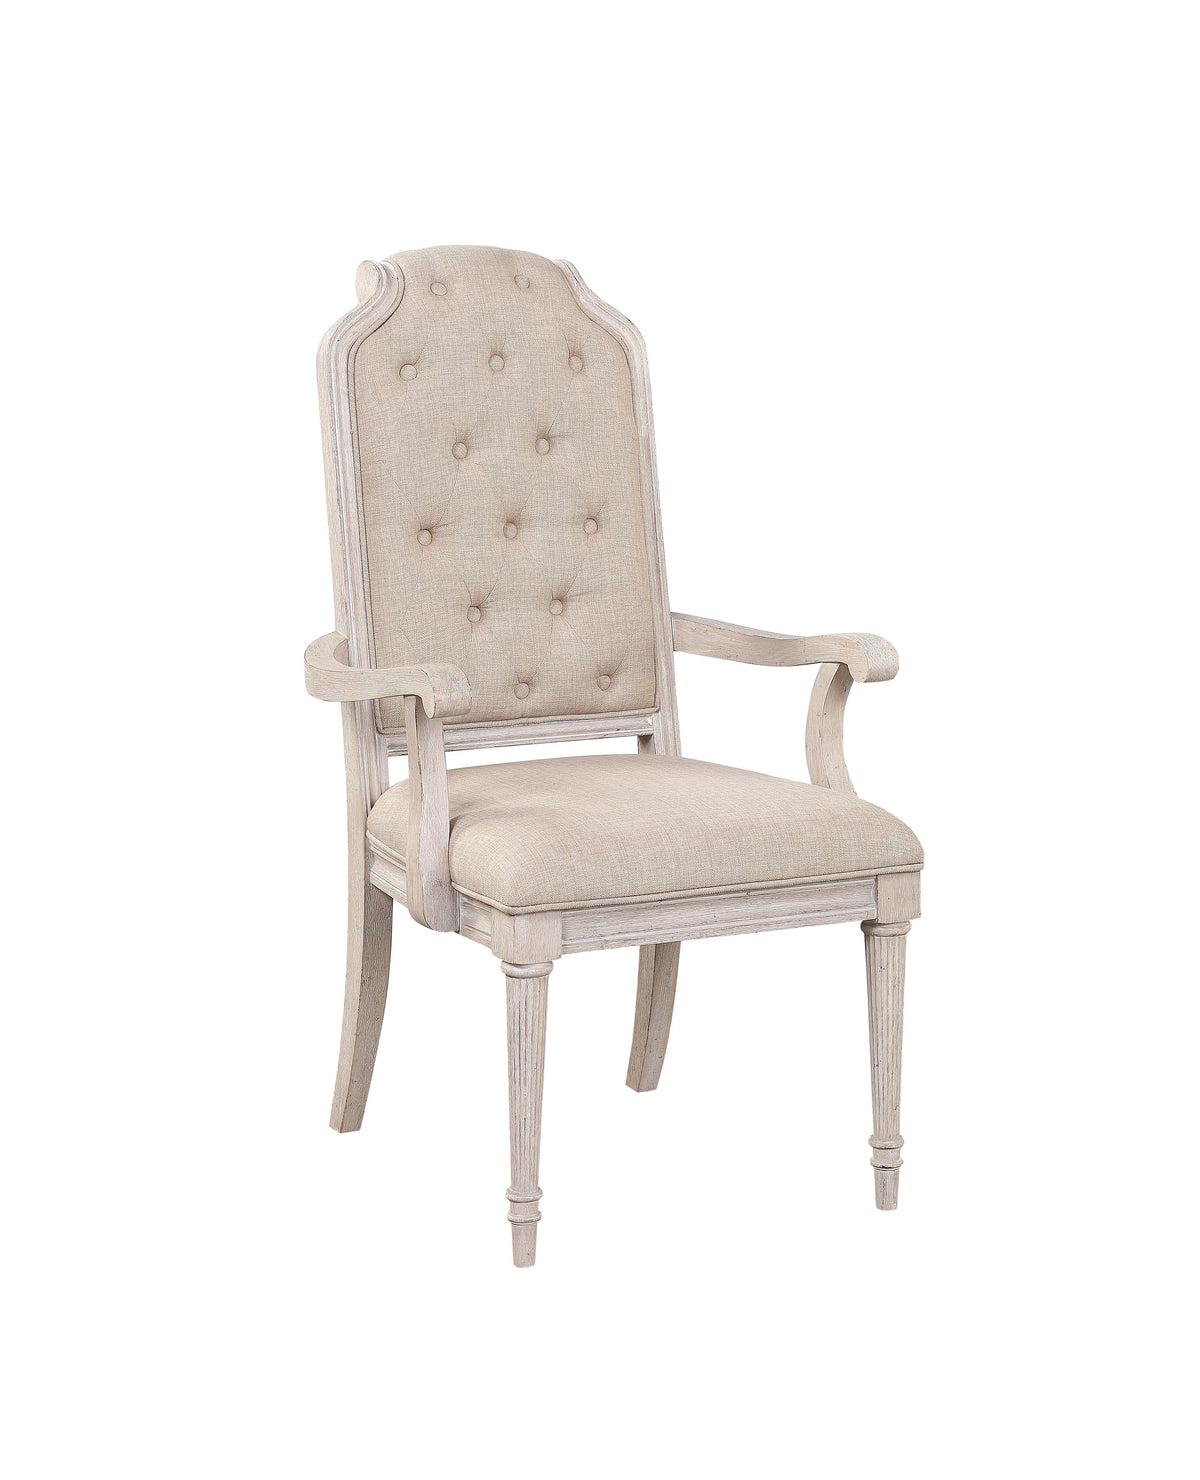 Wynsor Fabric & Antique Champagne Arm Chair  Half Price Furniture